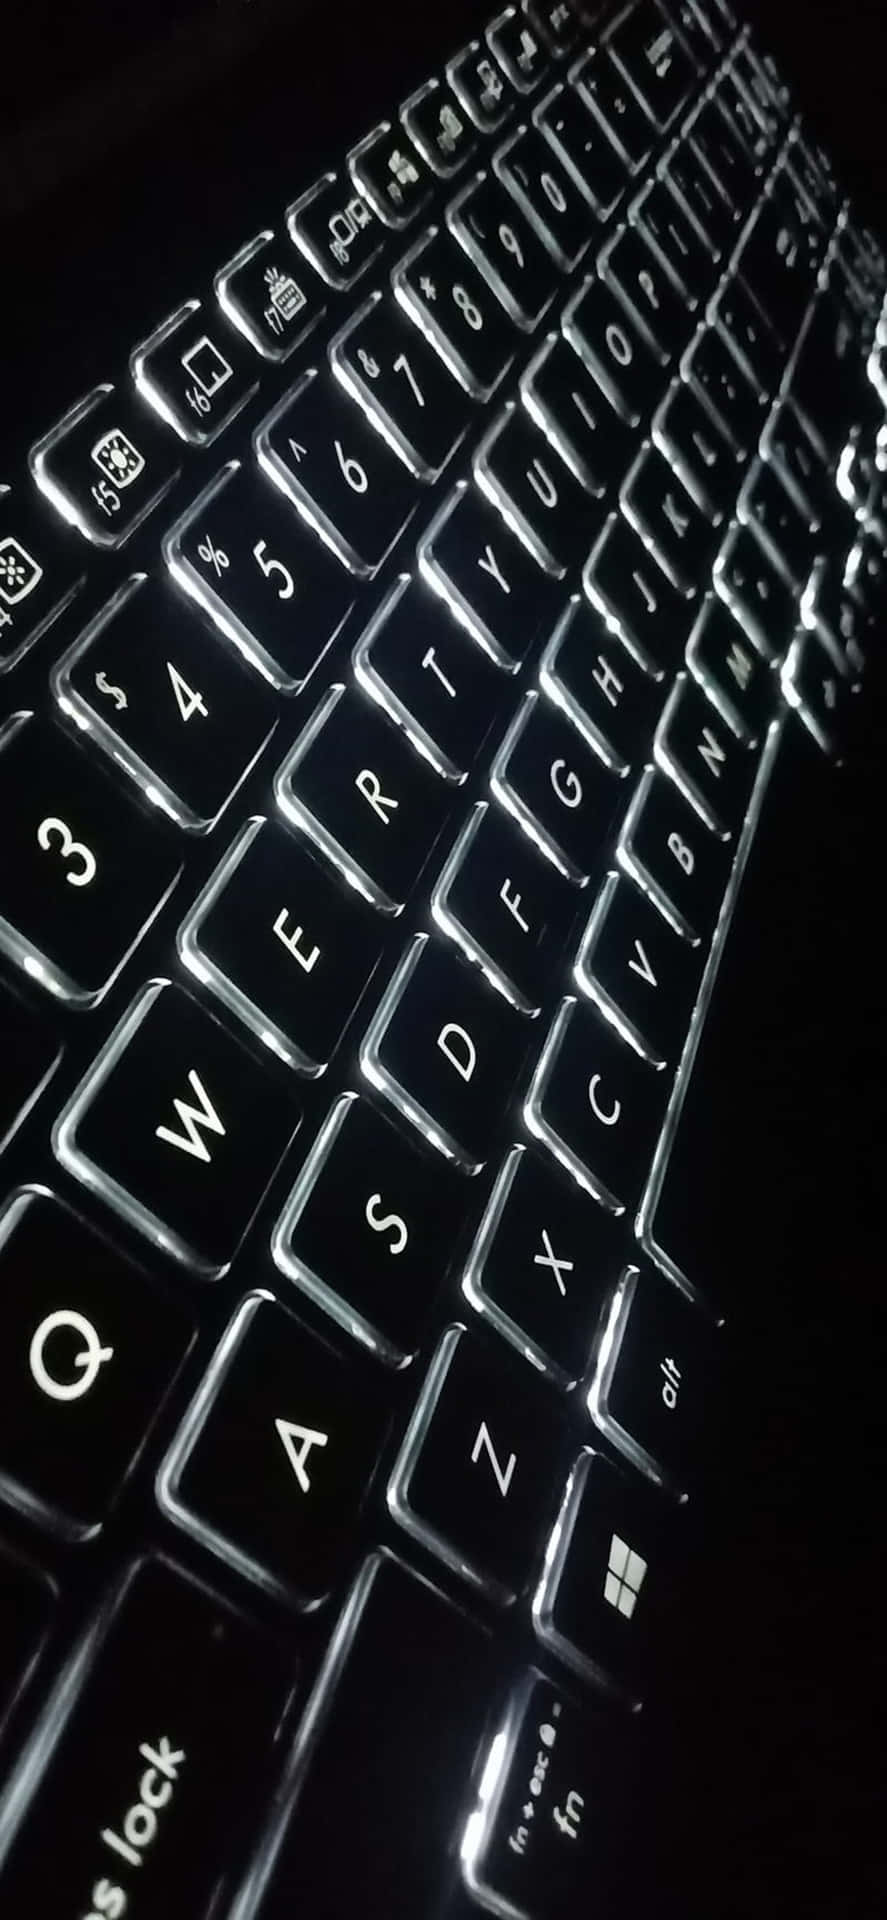 A Close Up Of A Keyboard In The Dark